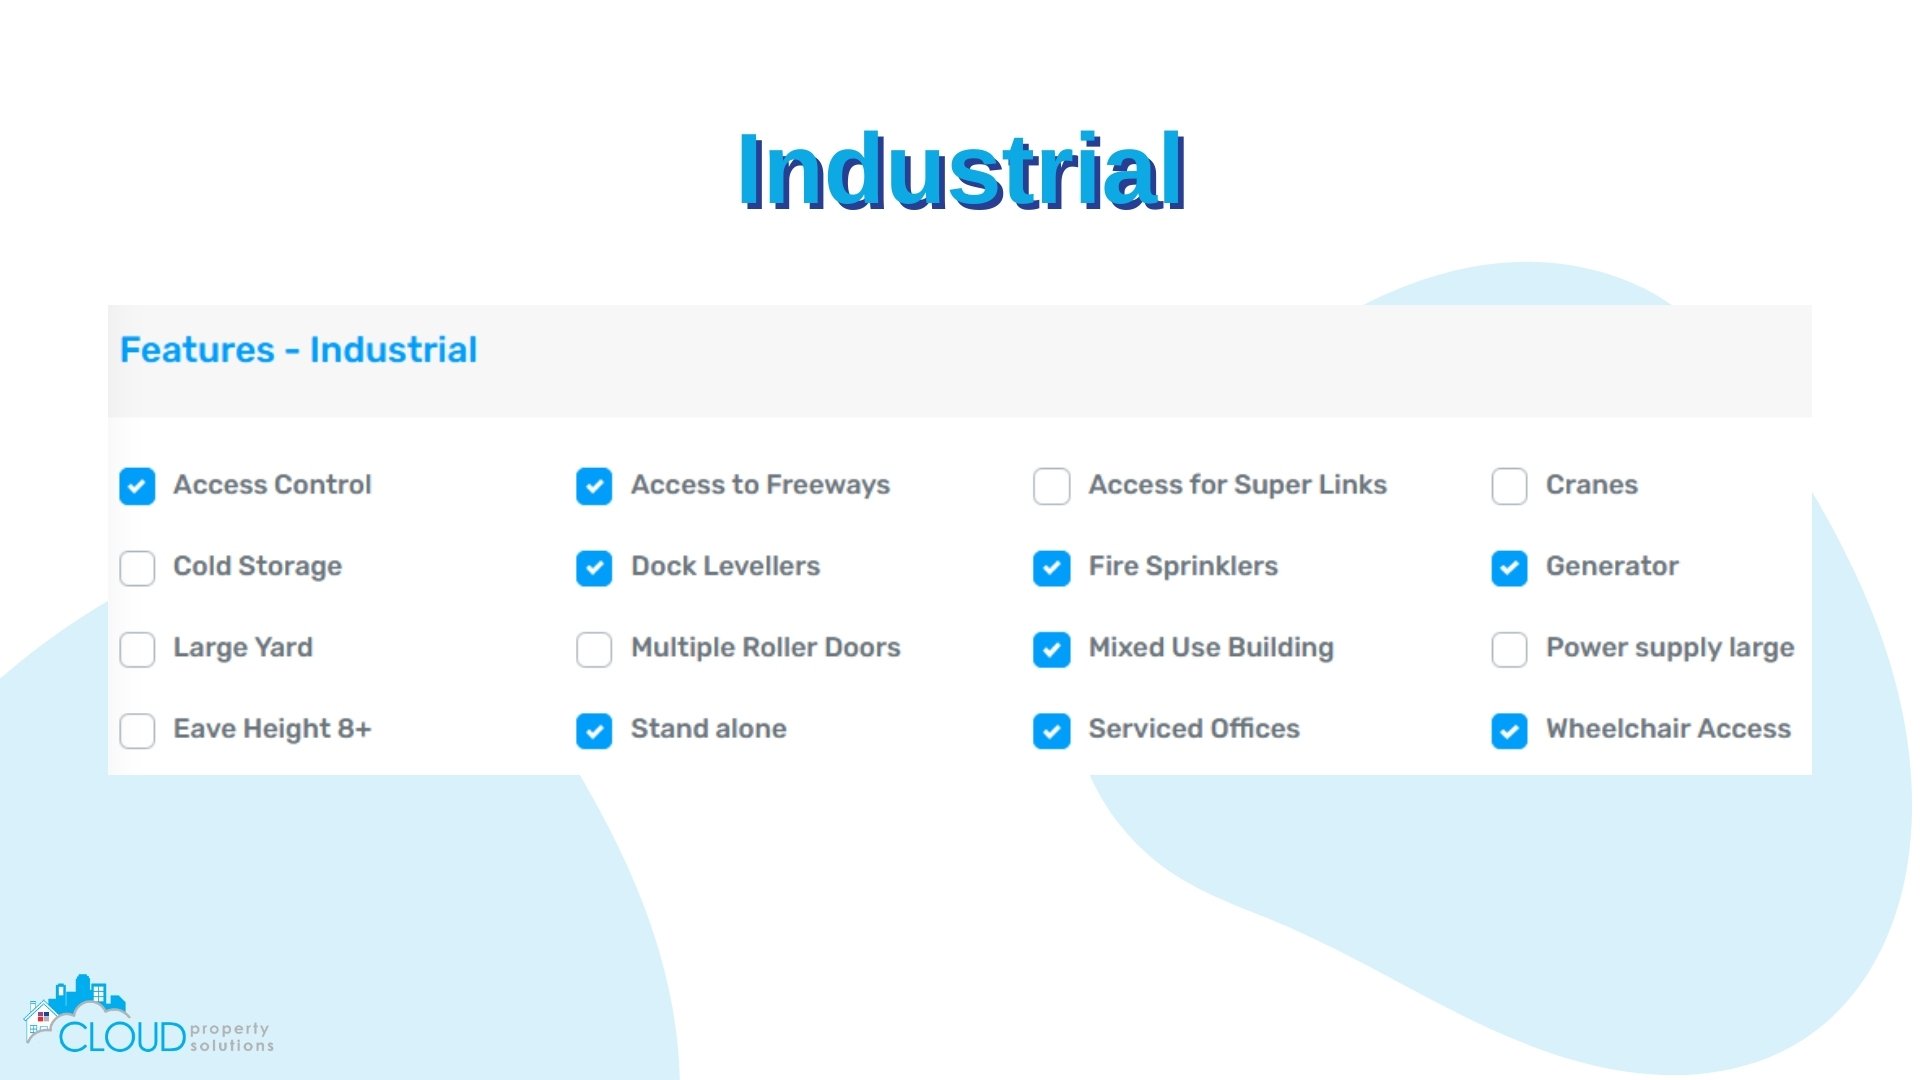 These features are available for all Industrial property listings